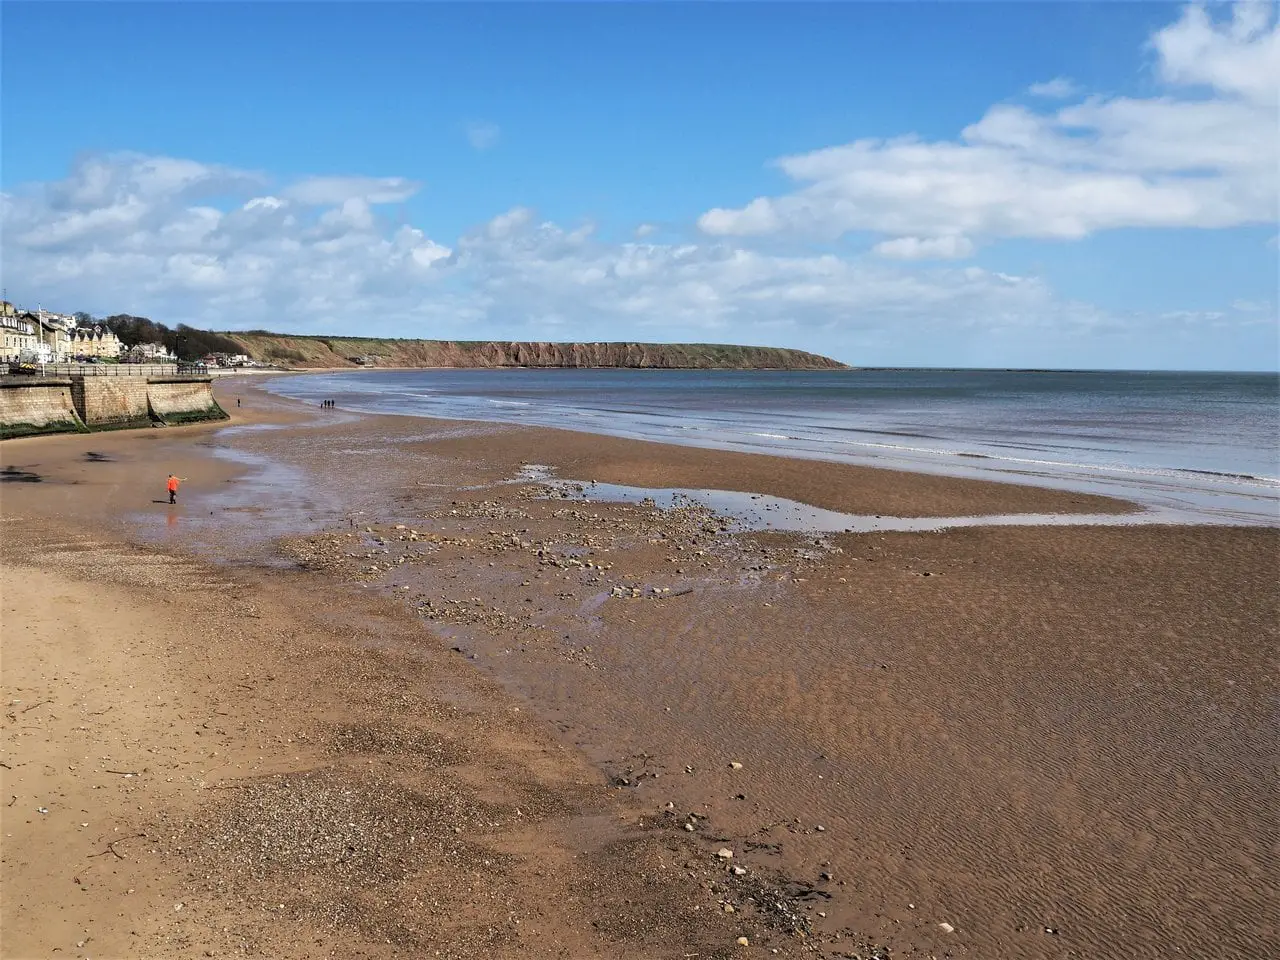 Filey Bay in Yorkshire